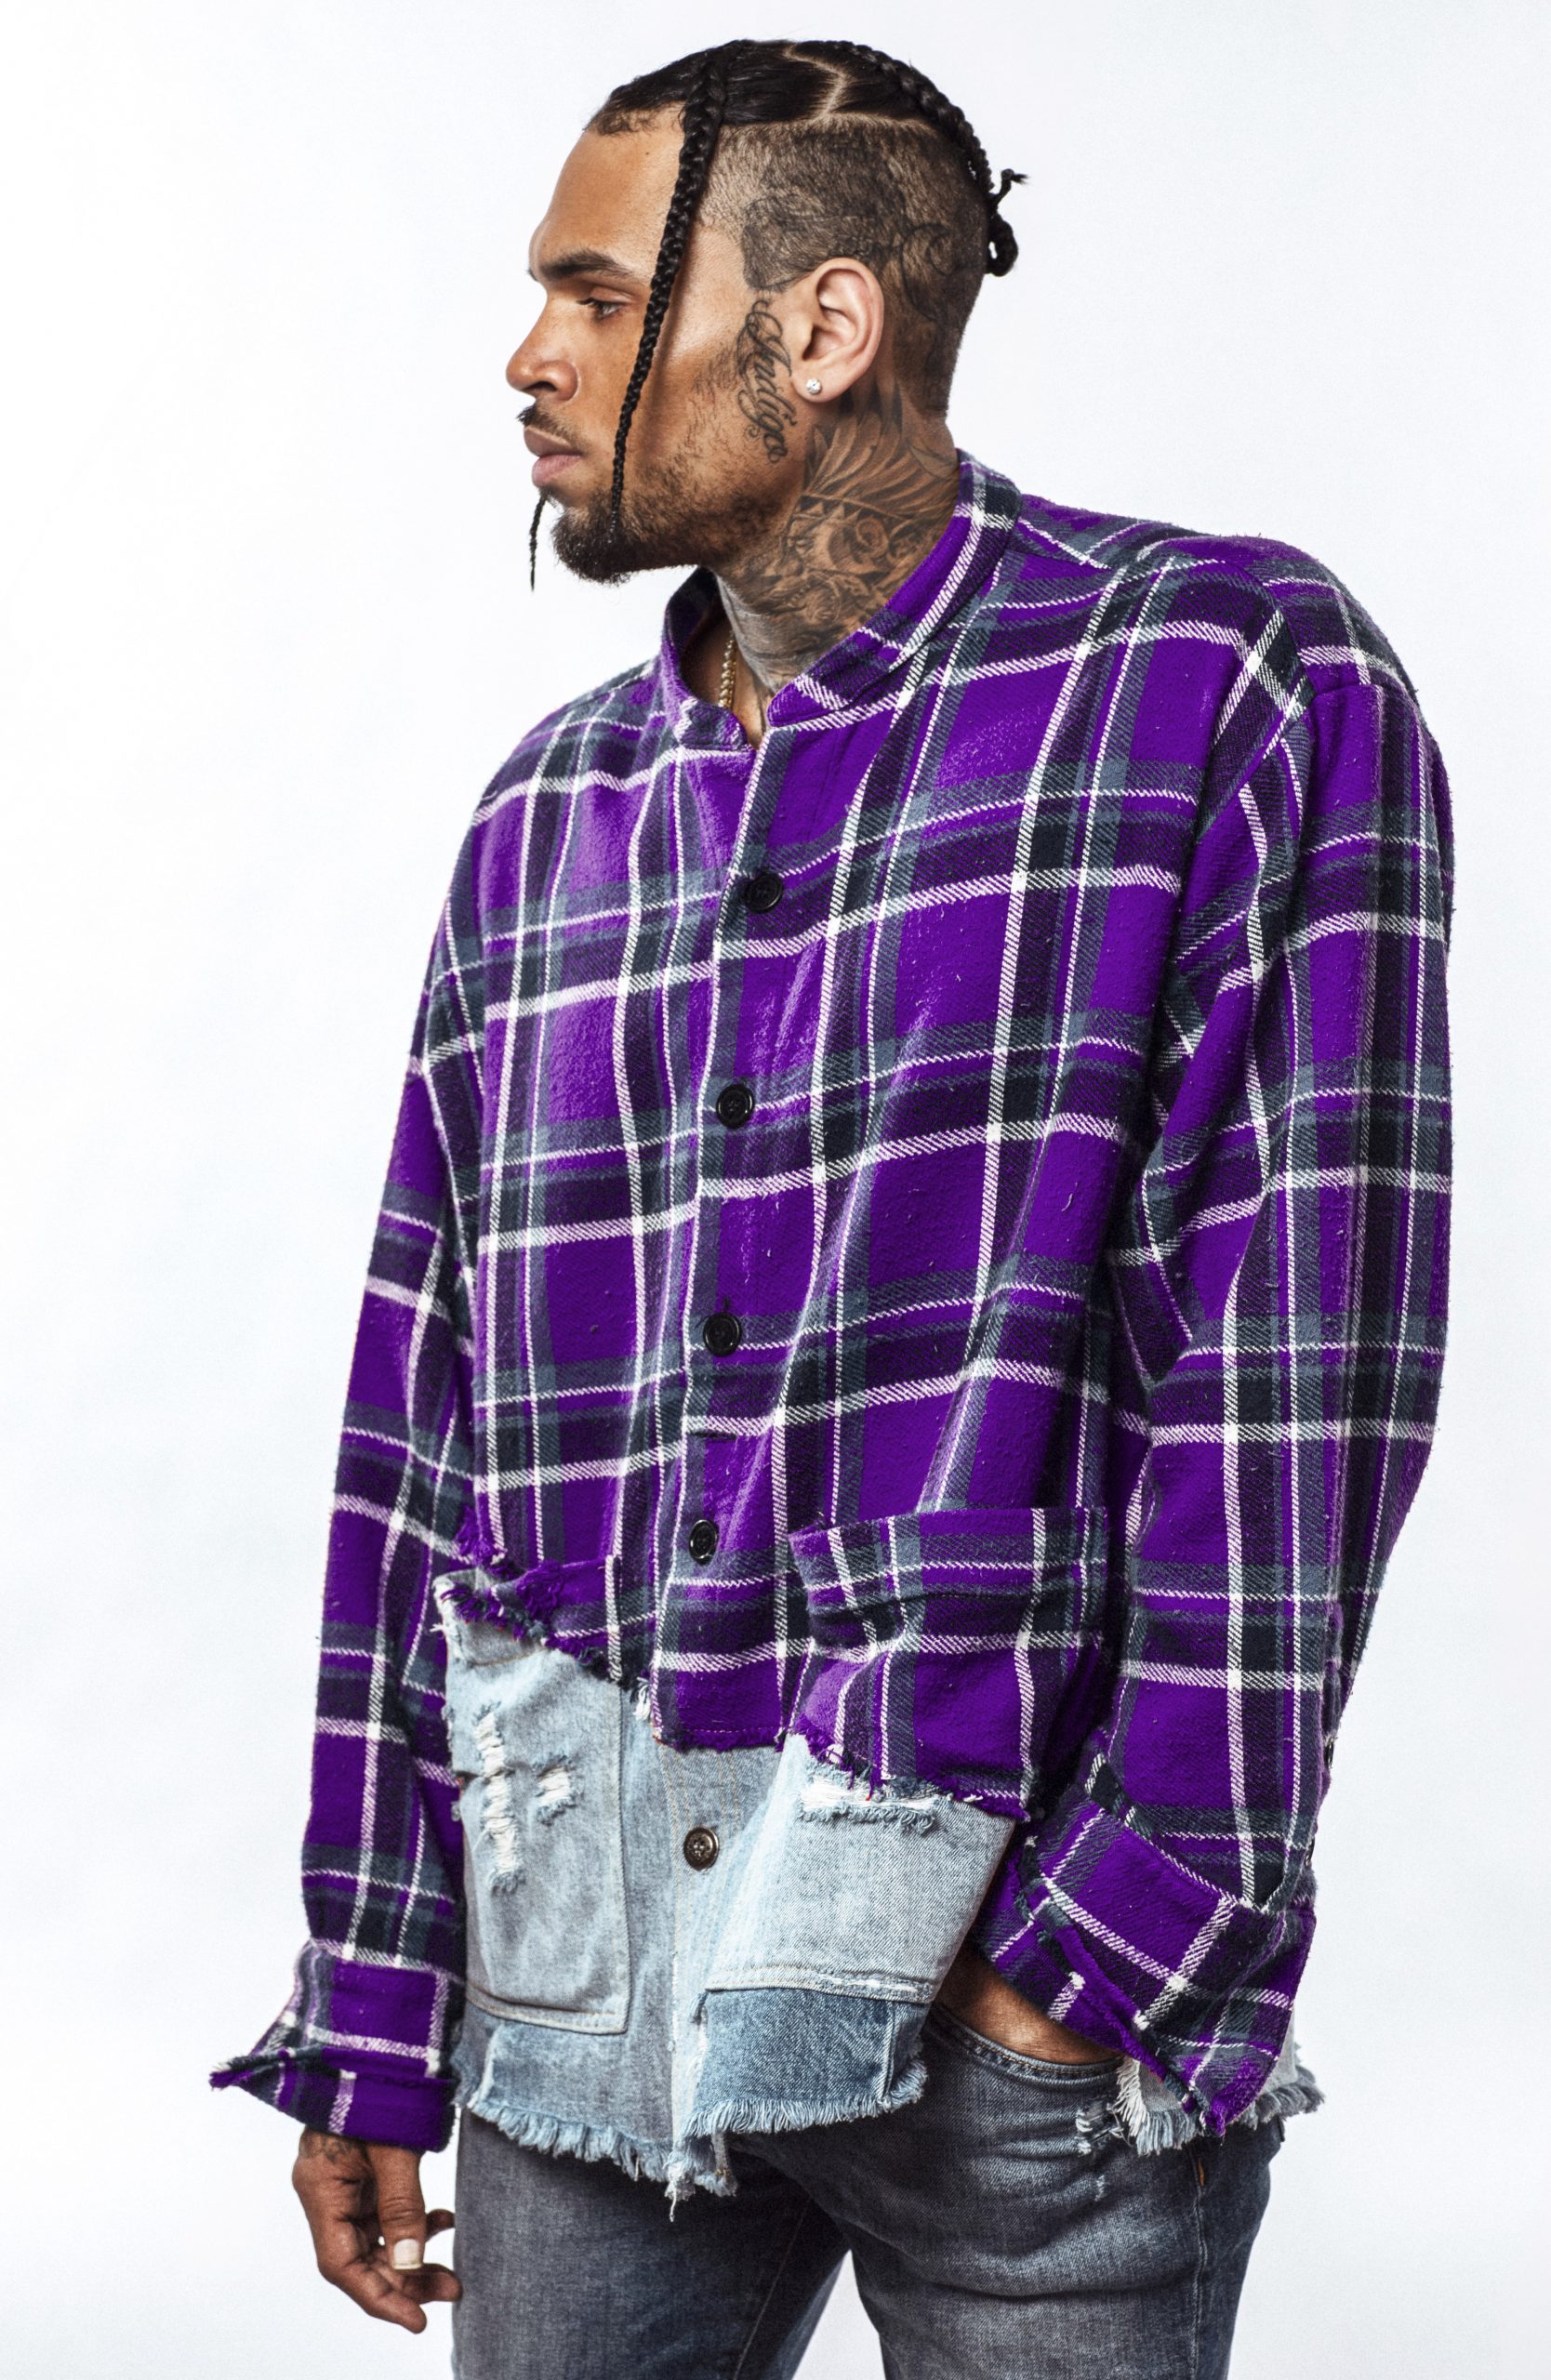 chris brown party audio download